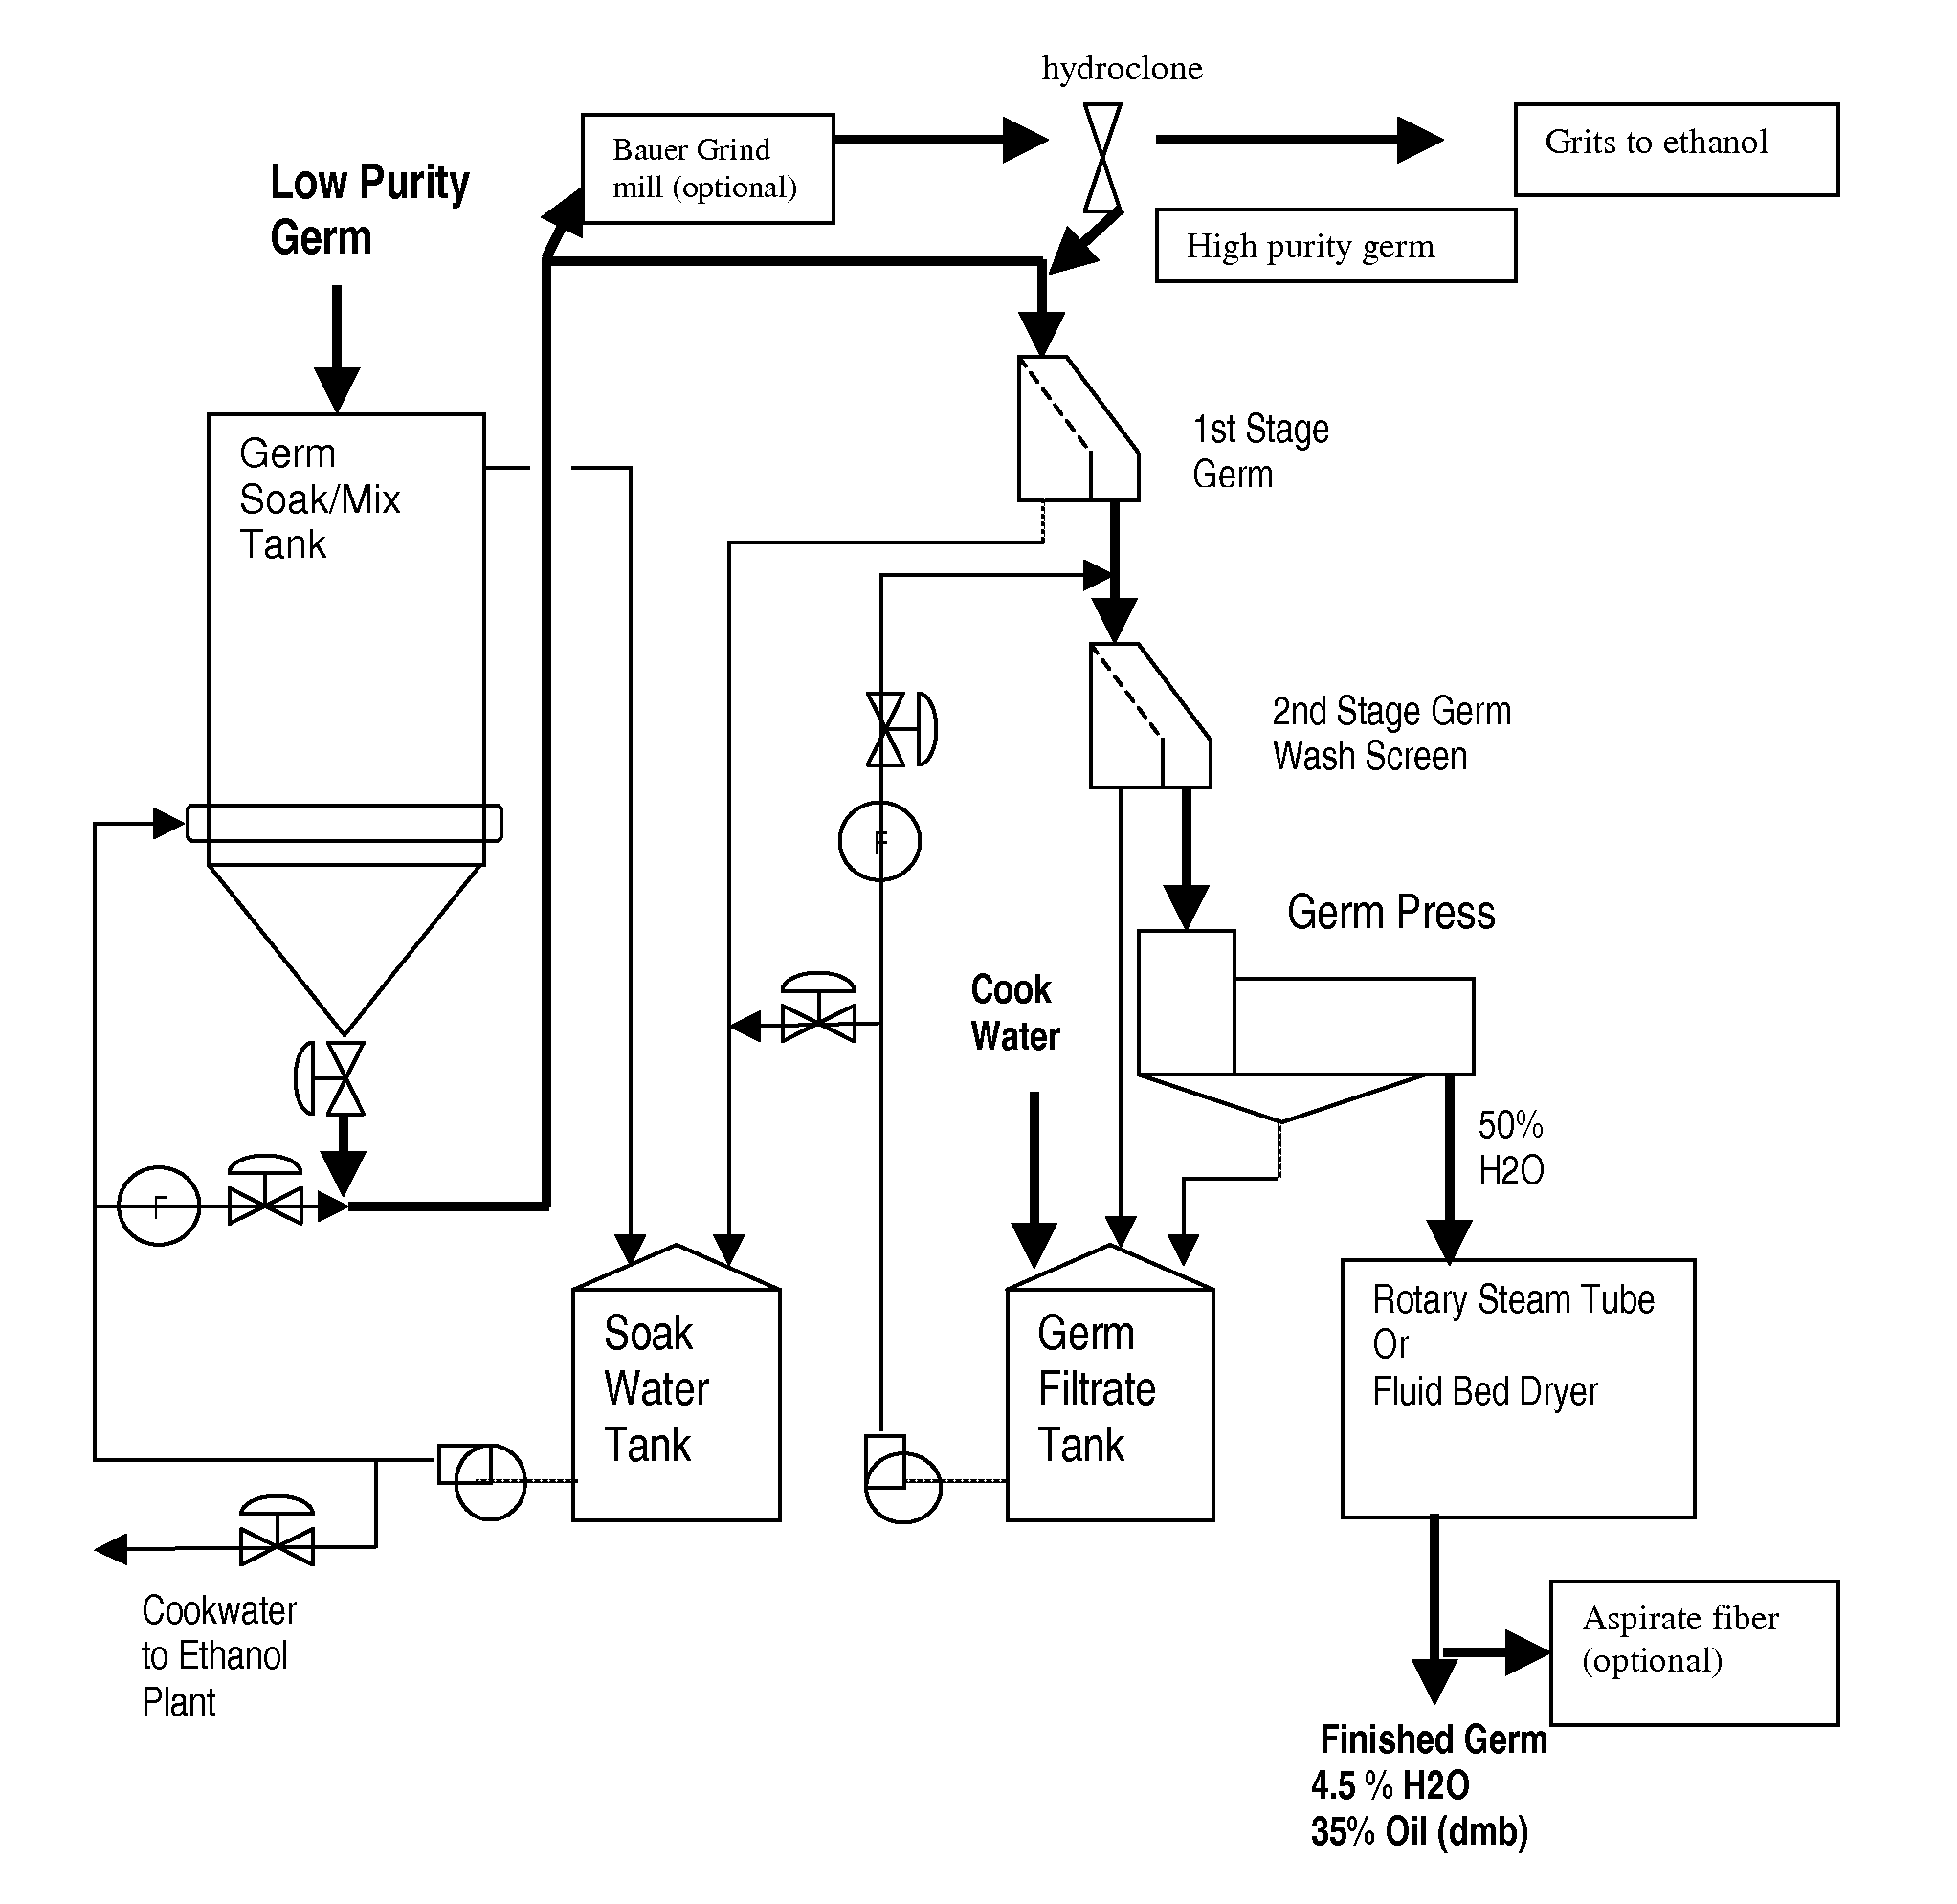 Process for improving products of dry milling